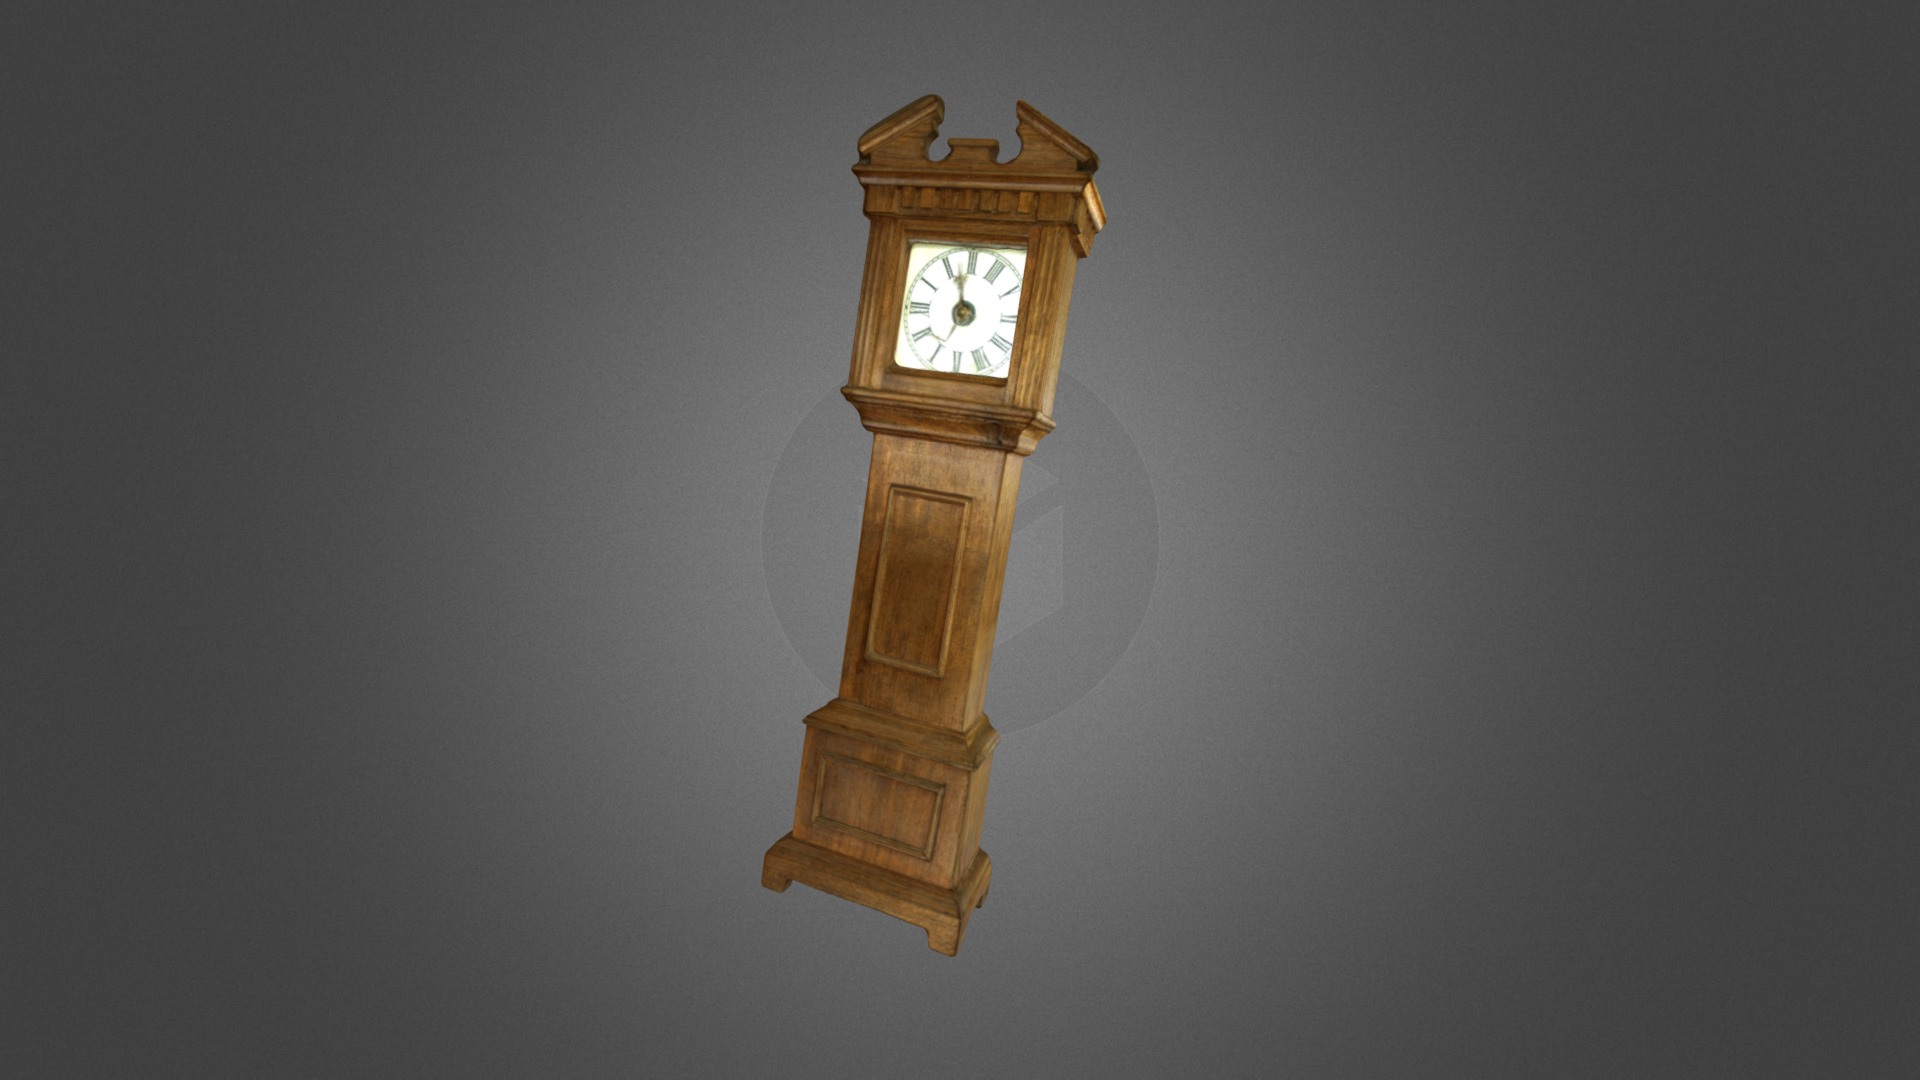 3D model Louis XIV - This is a 3D model of the Louis XIV. The 3D model is about a clock on a wall.